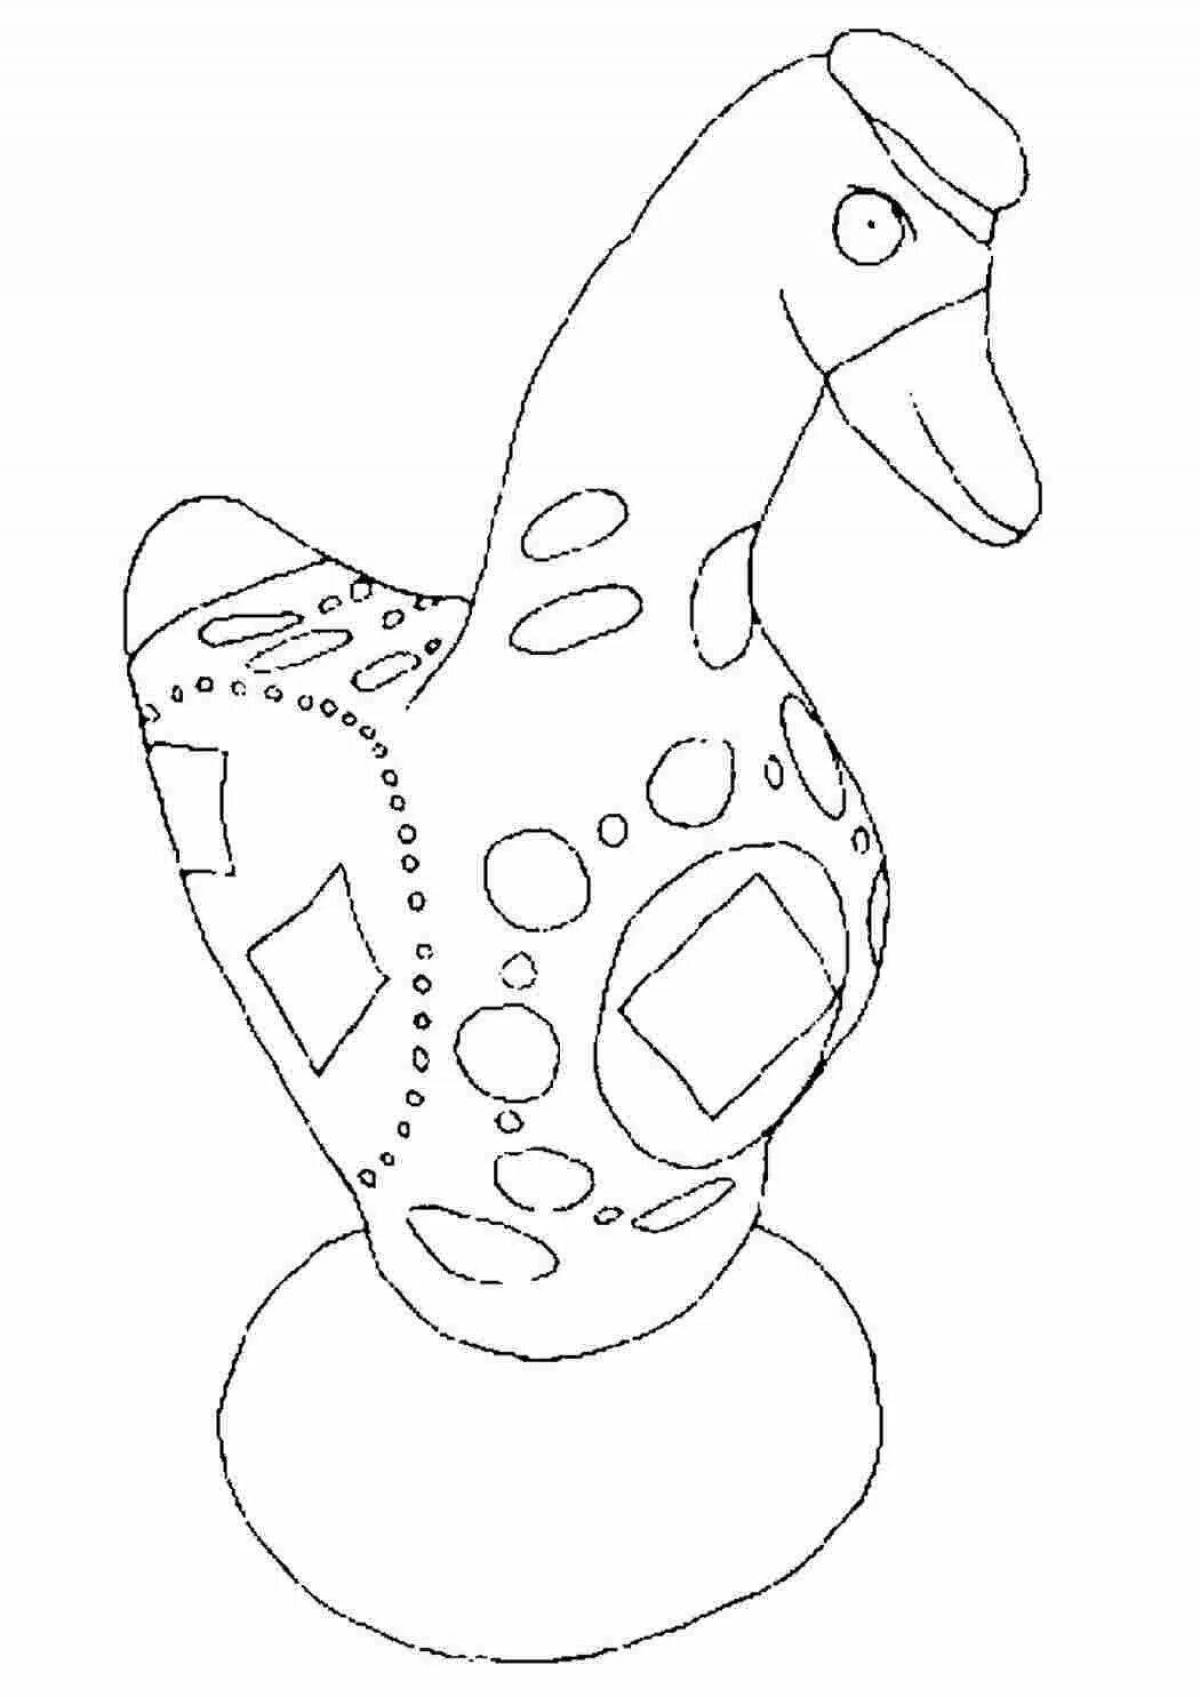 Coloring page Filimonov's playful whistle